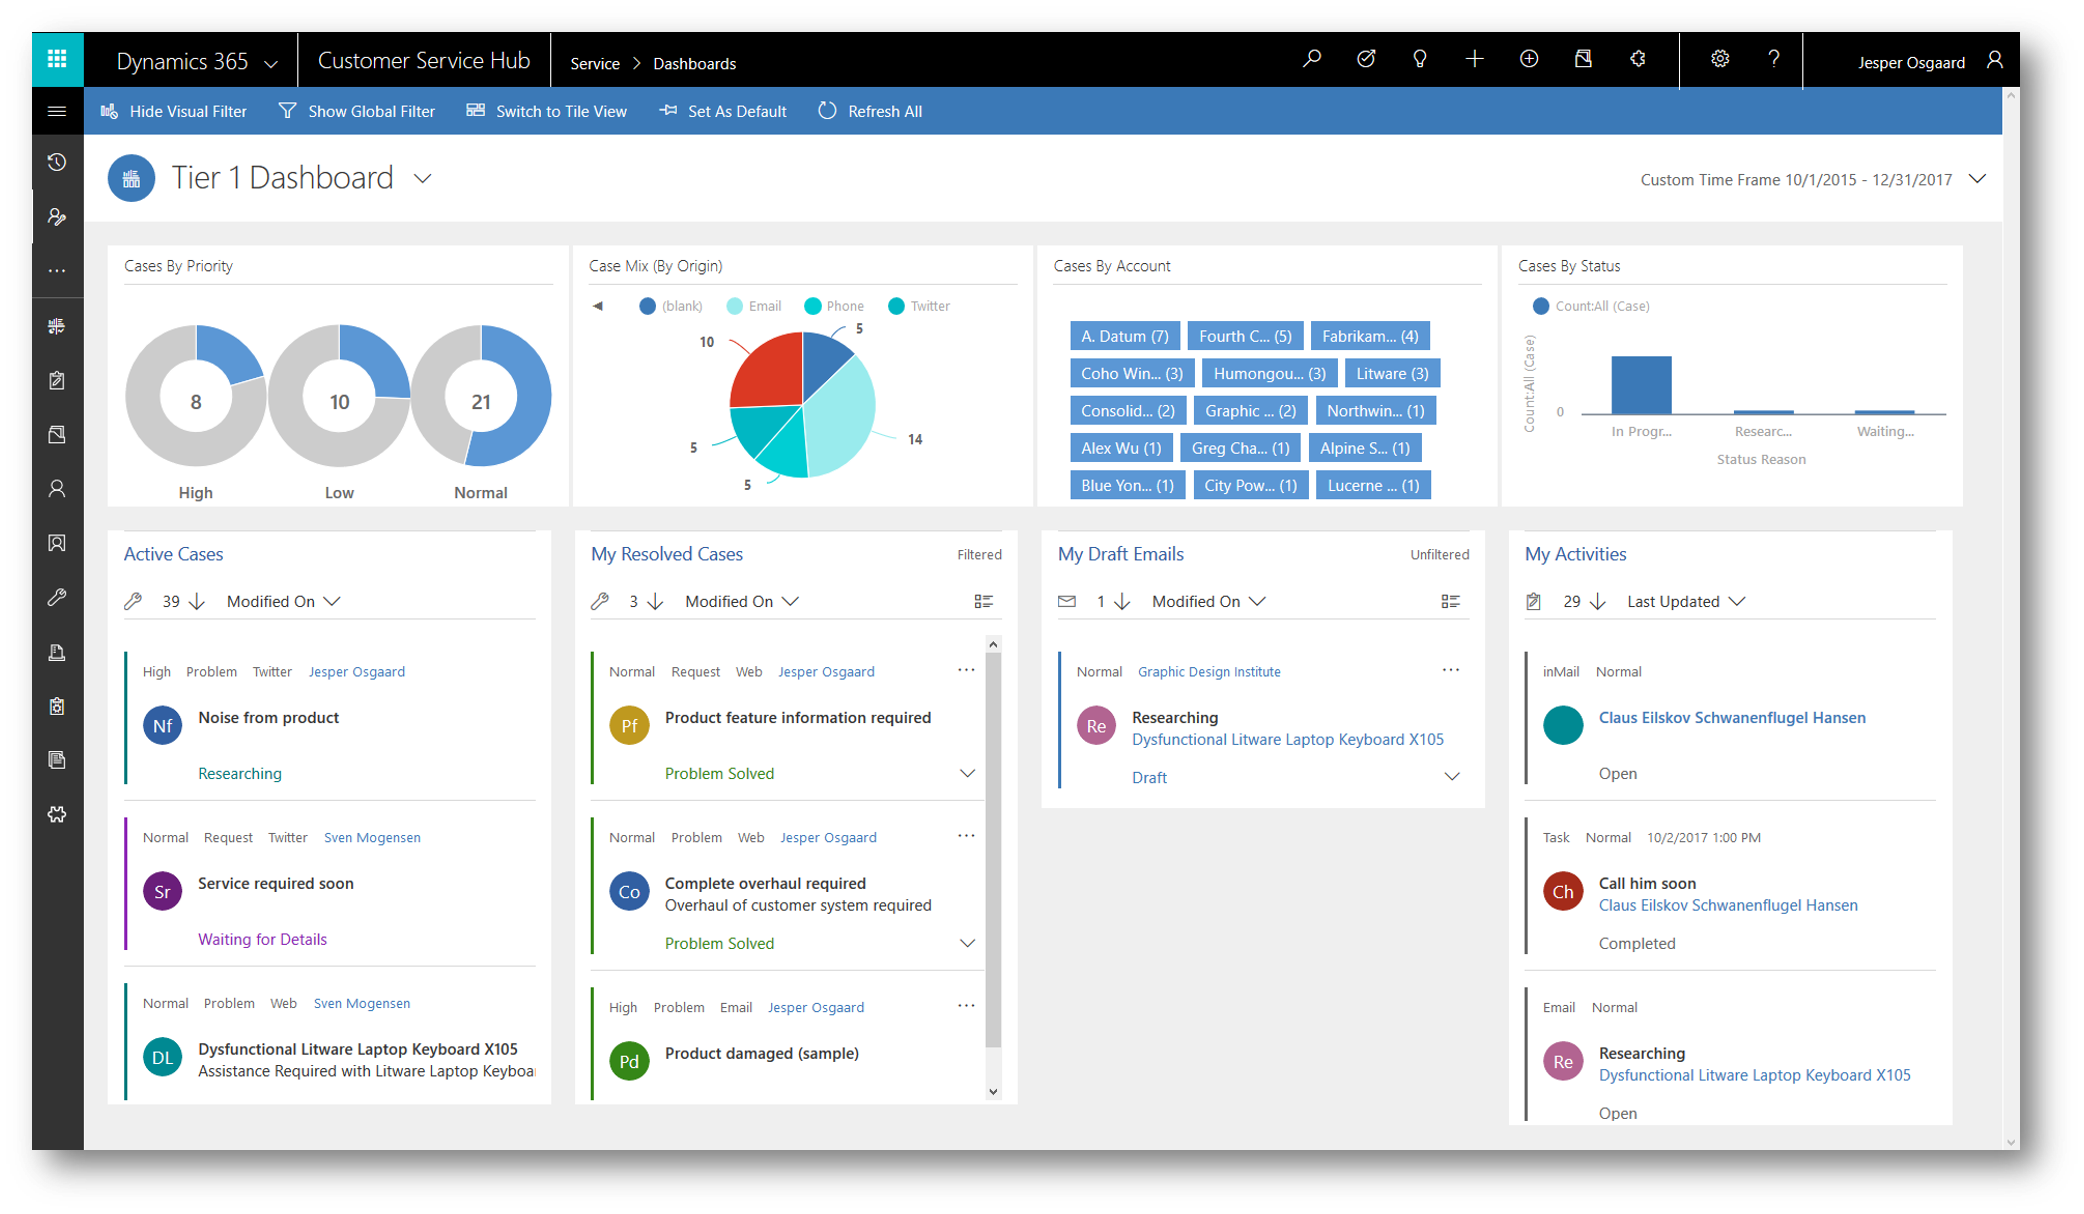 Customer Services Module Life Cycle in Microsoft Dynamics 365 CE